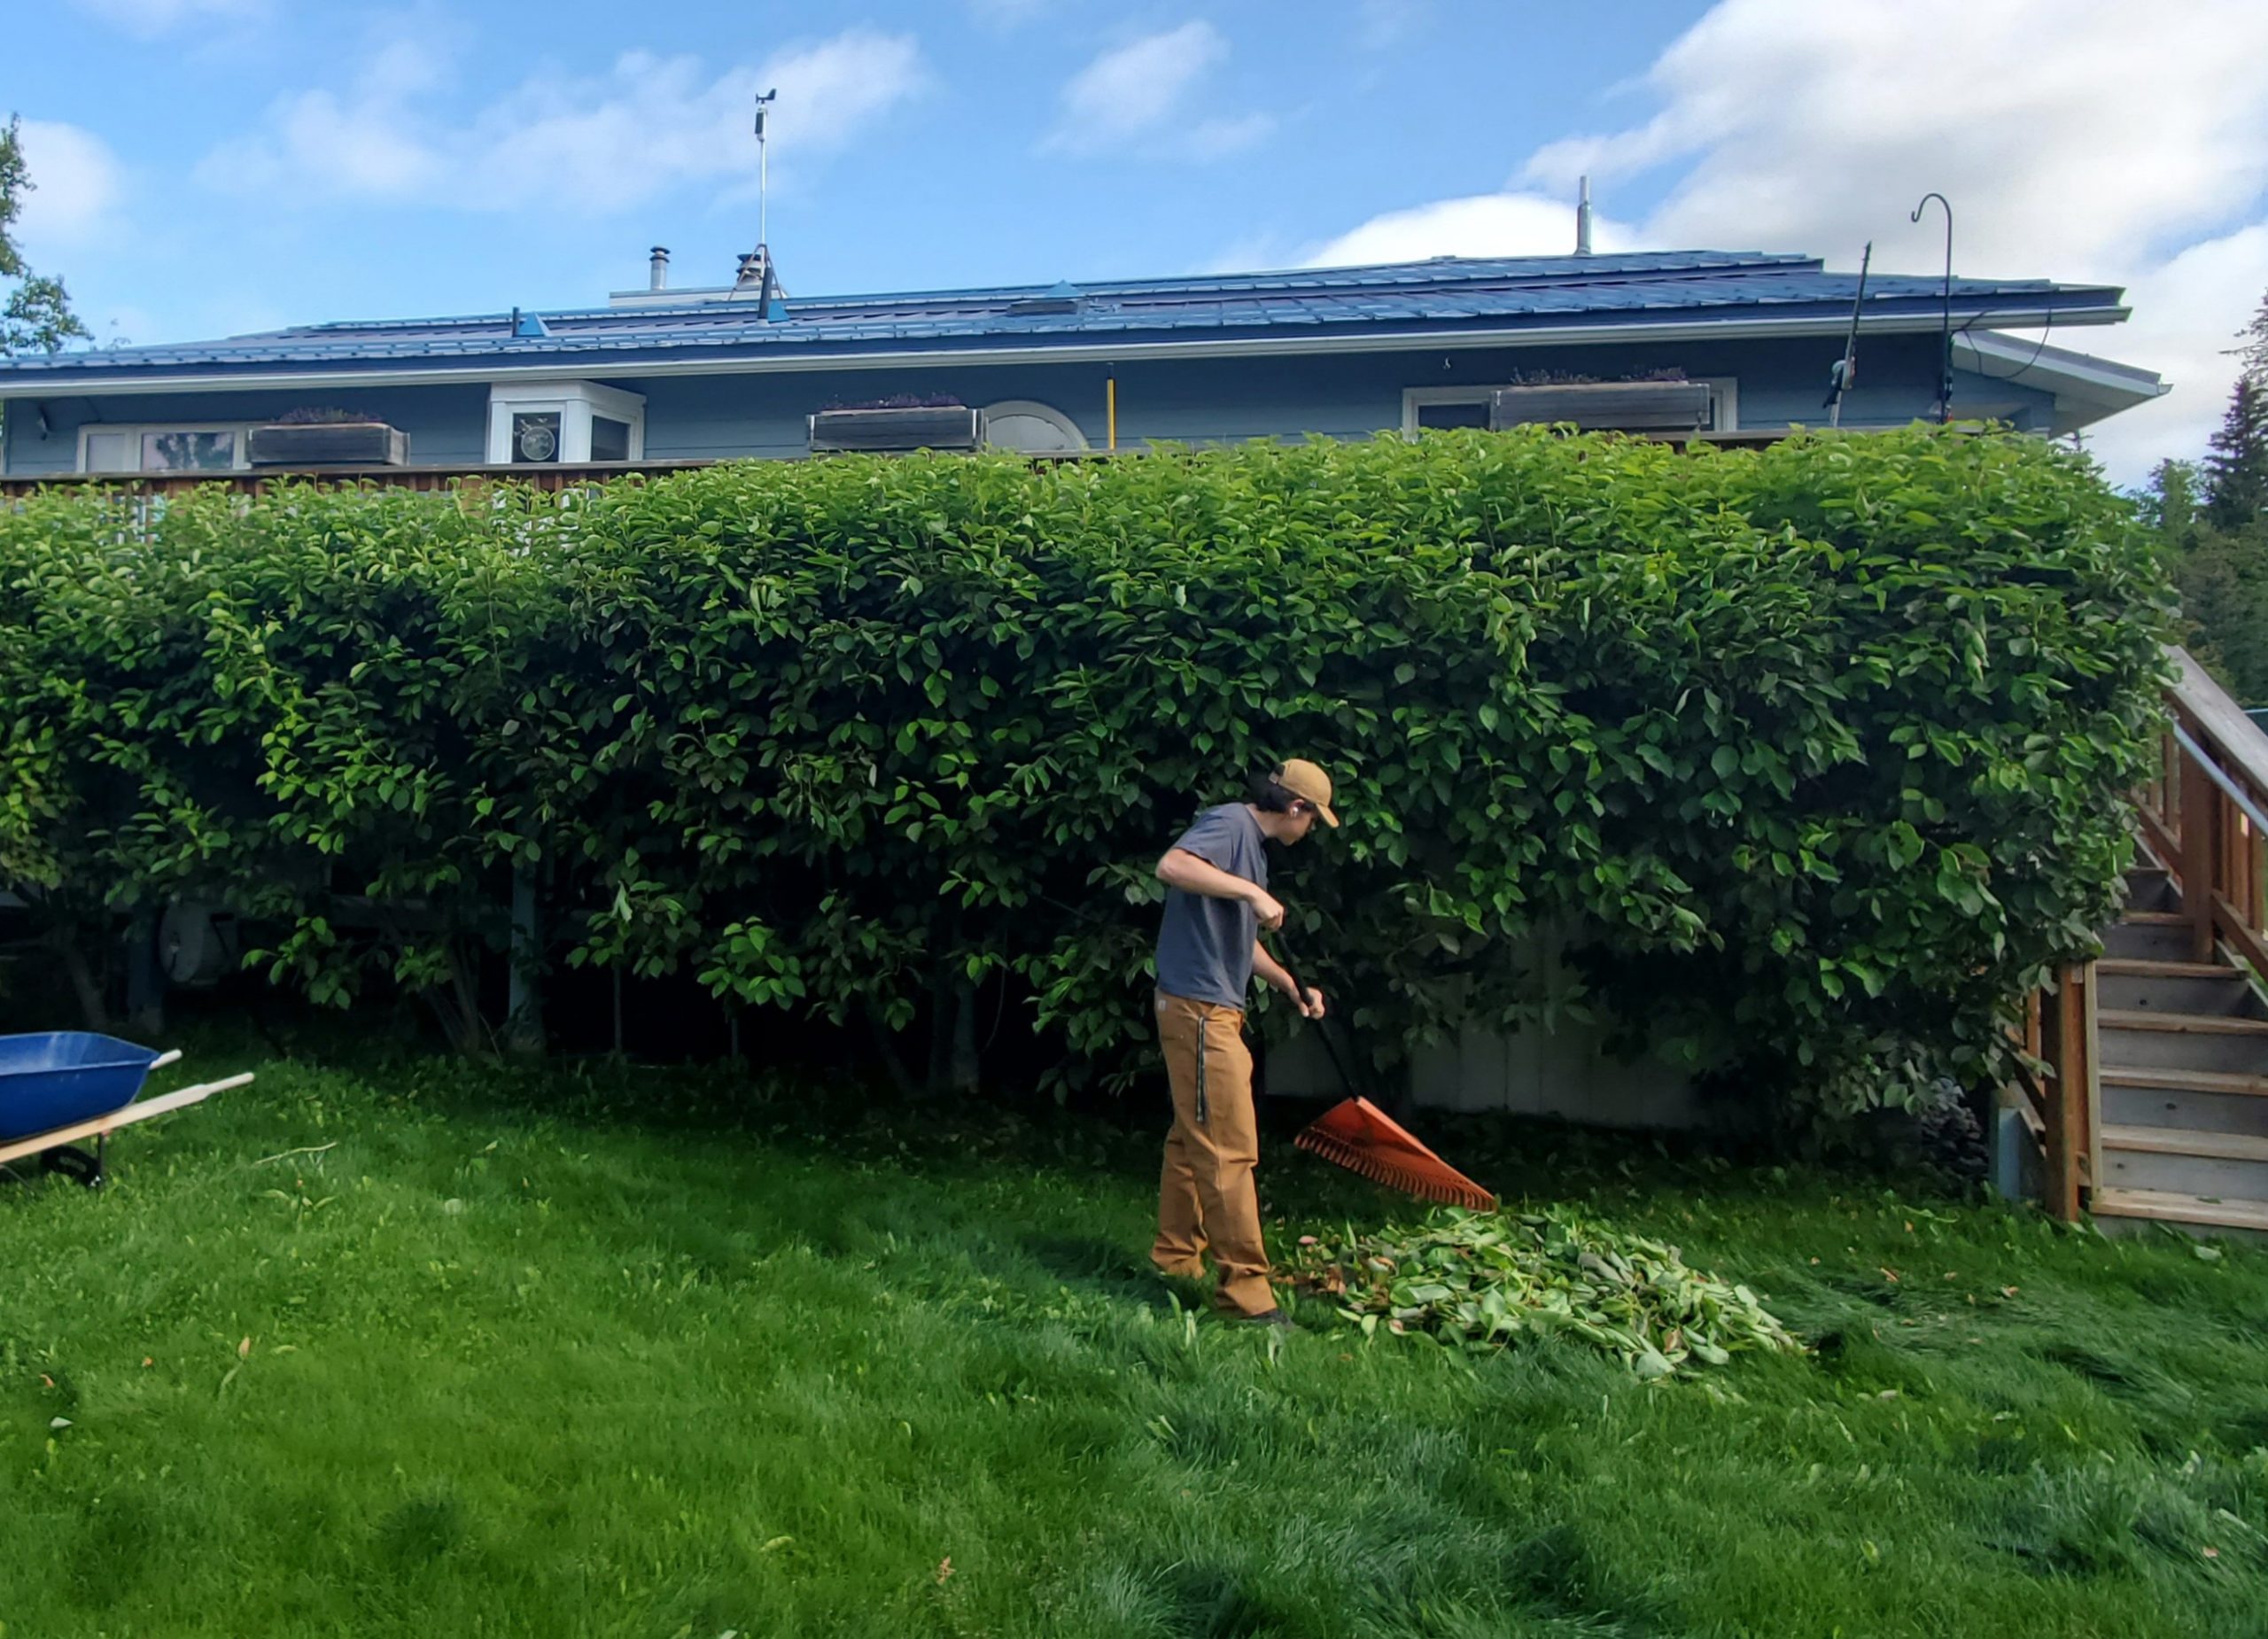 Tree pruning and shrub trimming can be performed throughout your property.